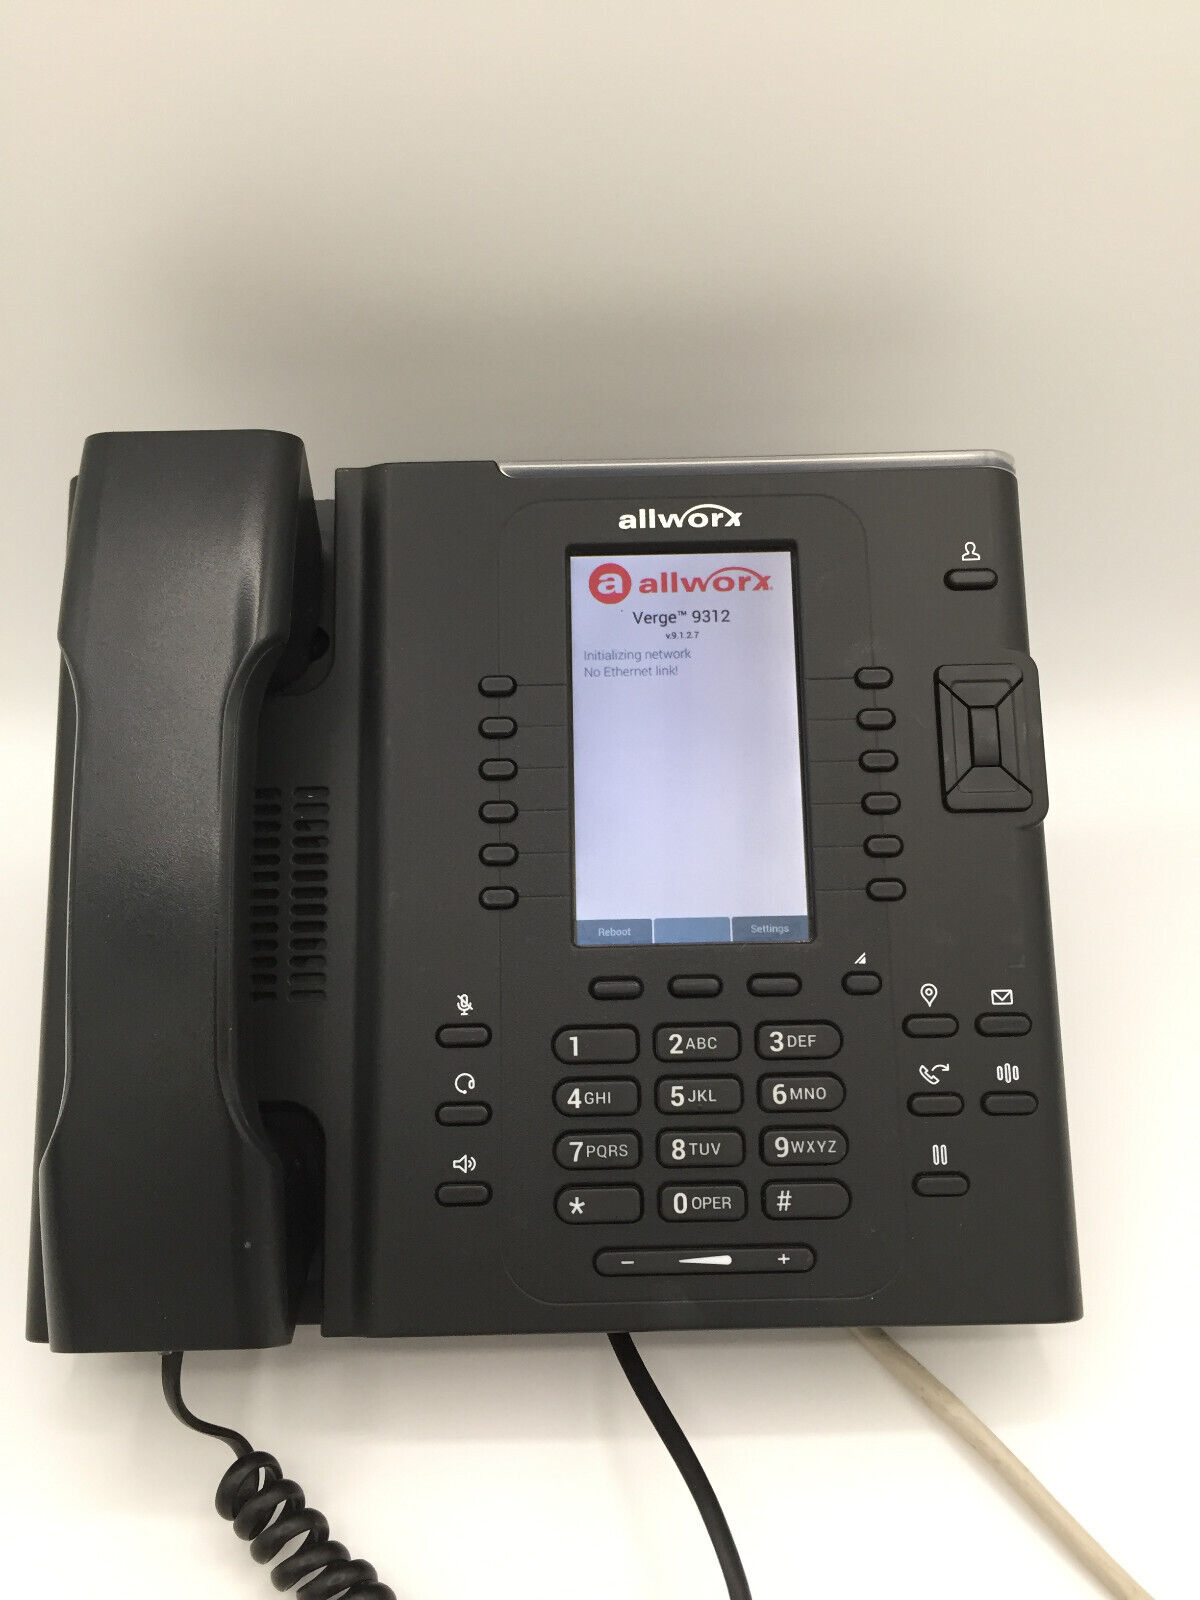 Allworx Verge 9312 Color VoIP & POE Office Phone with stand. No AC Adapter